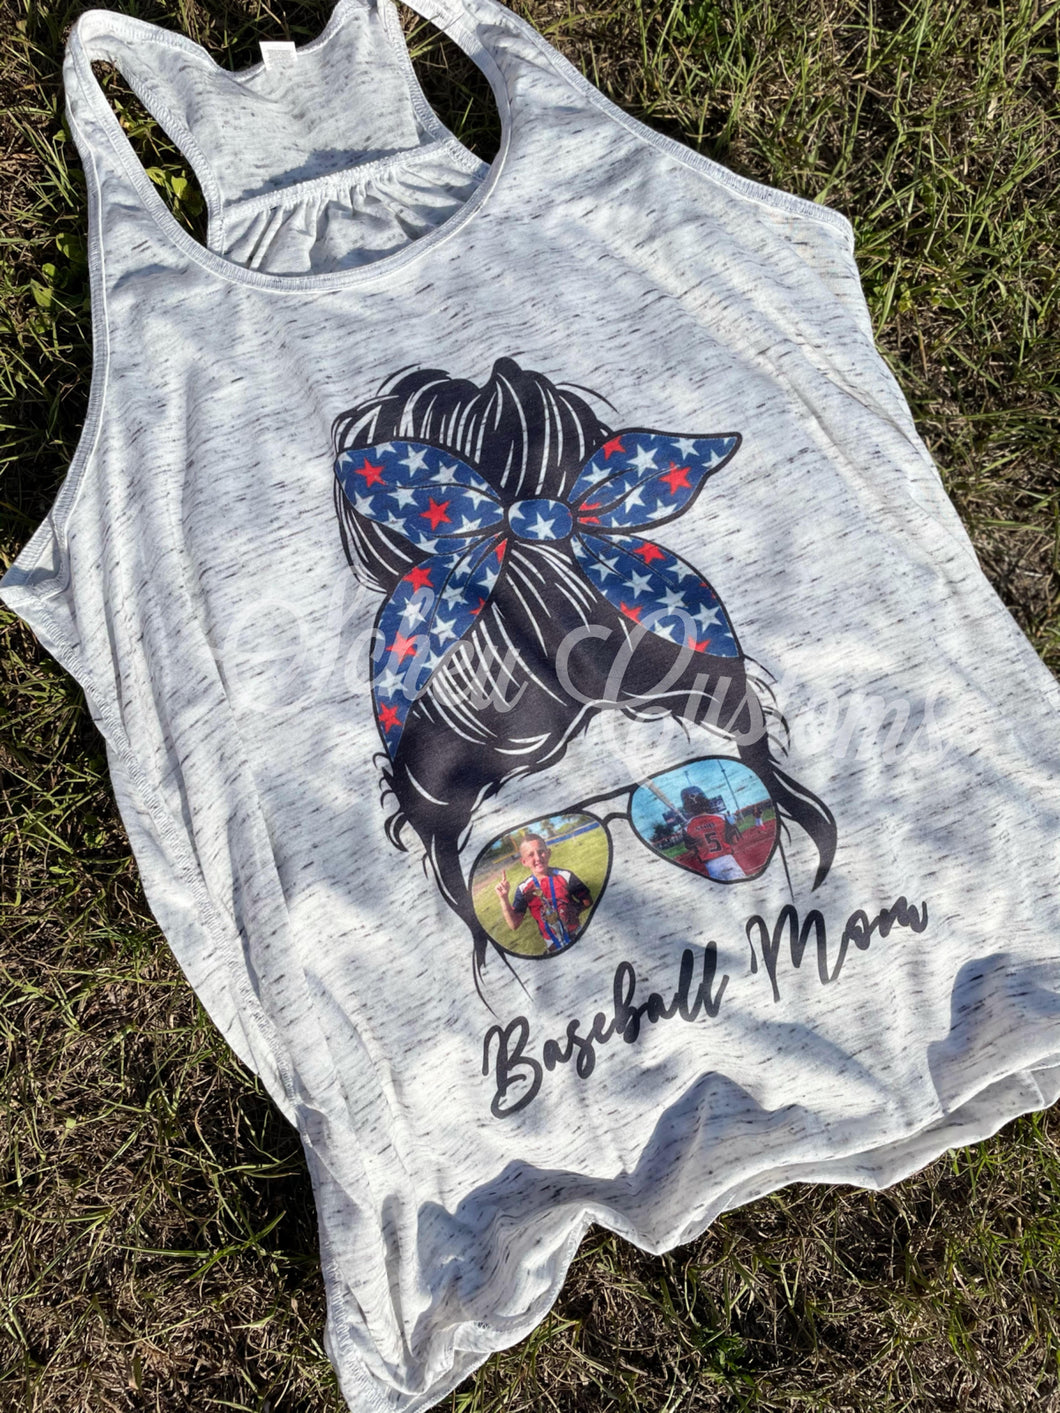 MESSY BUN with CUSTOMIZED GLASSES TEE